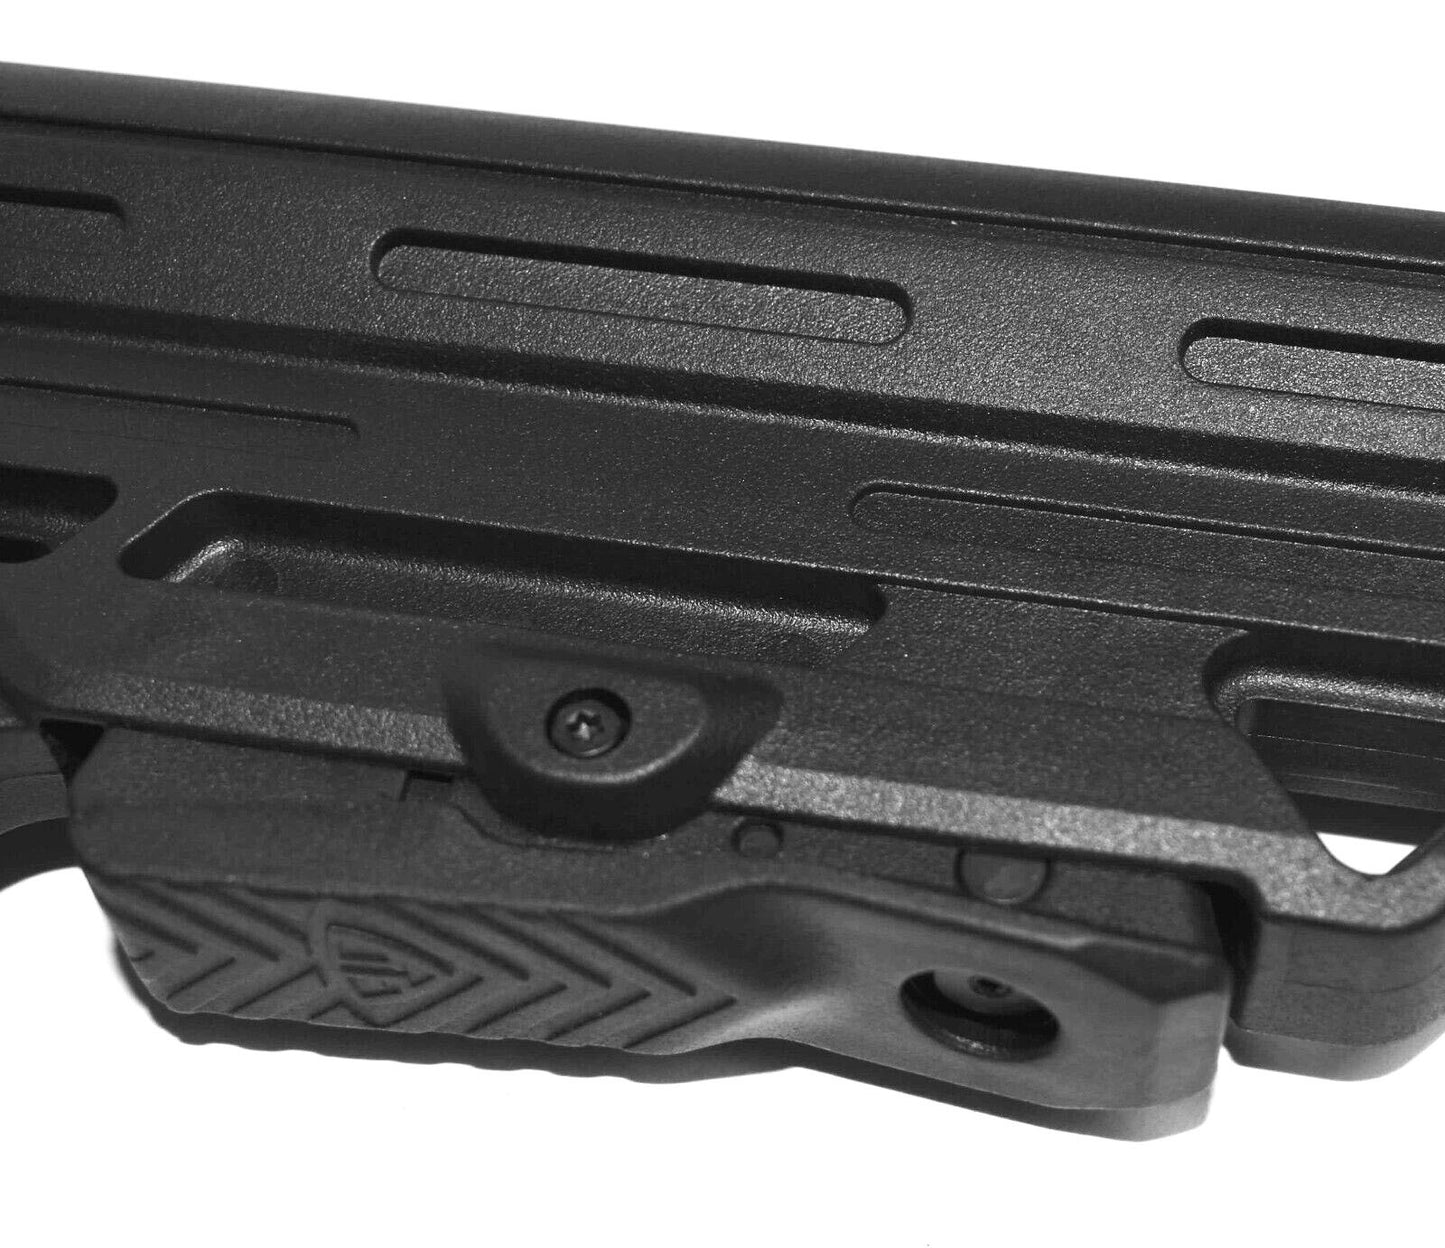 Tactical Fury Stock Compatible With Mossberg 590A1 12 Gauge Pump.